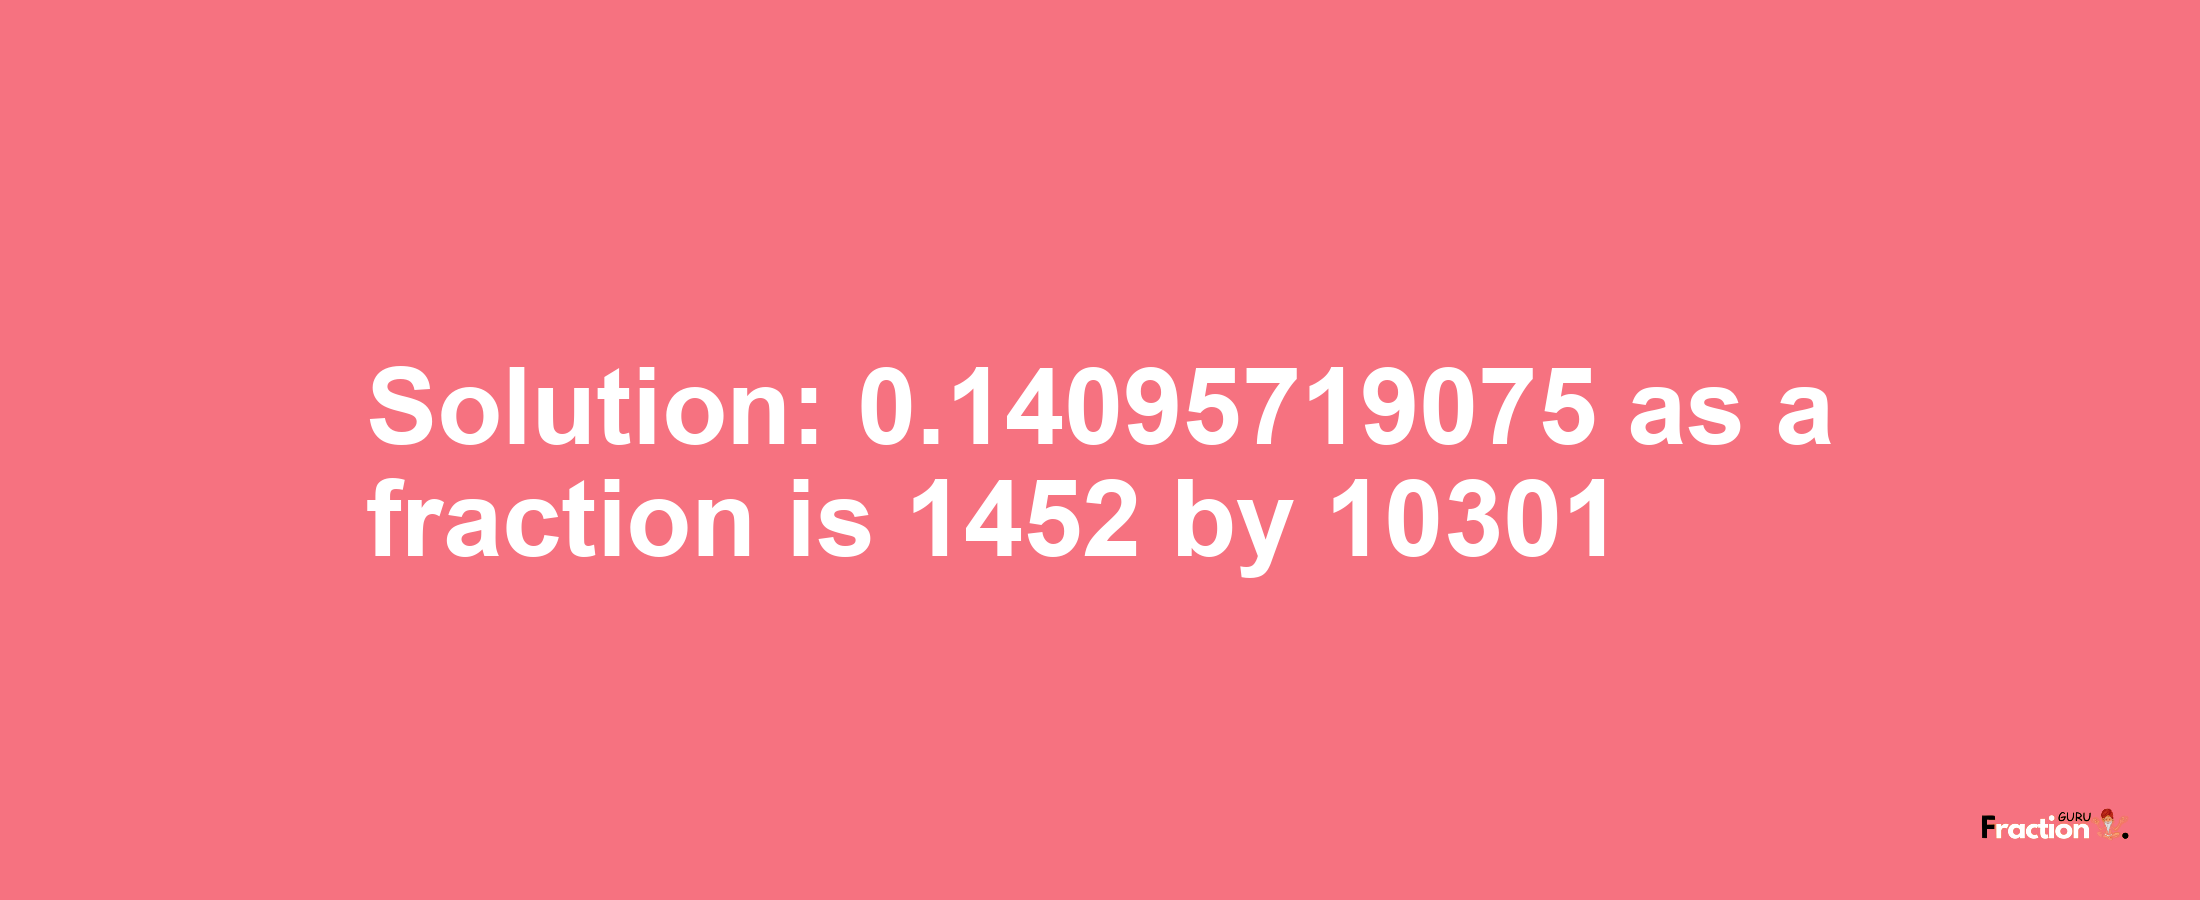 Solution:0.14095719075 as a fraction is 1452/10301